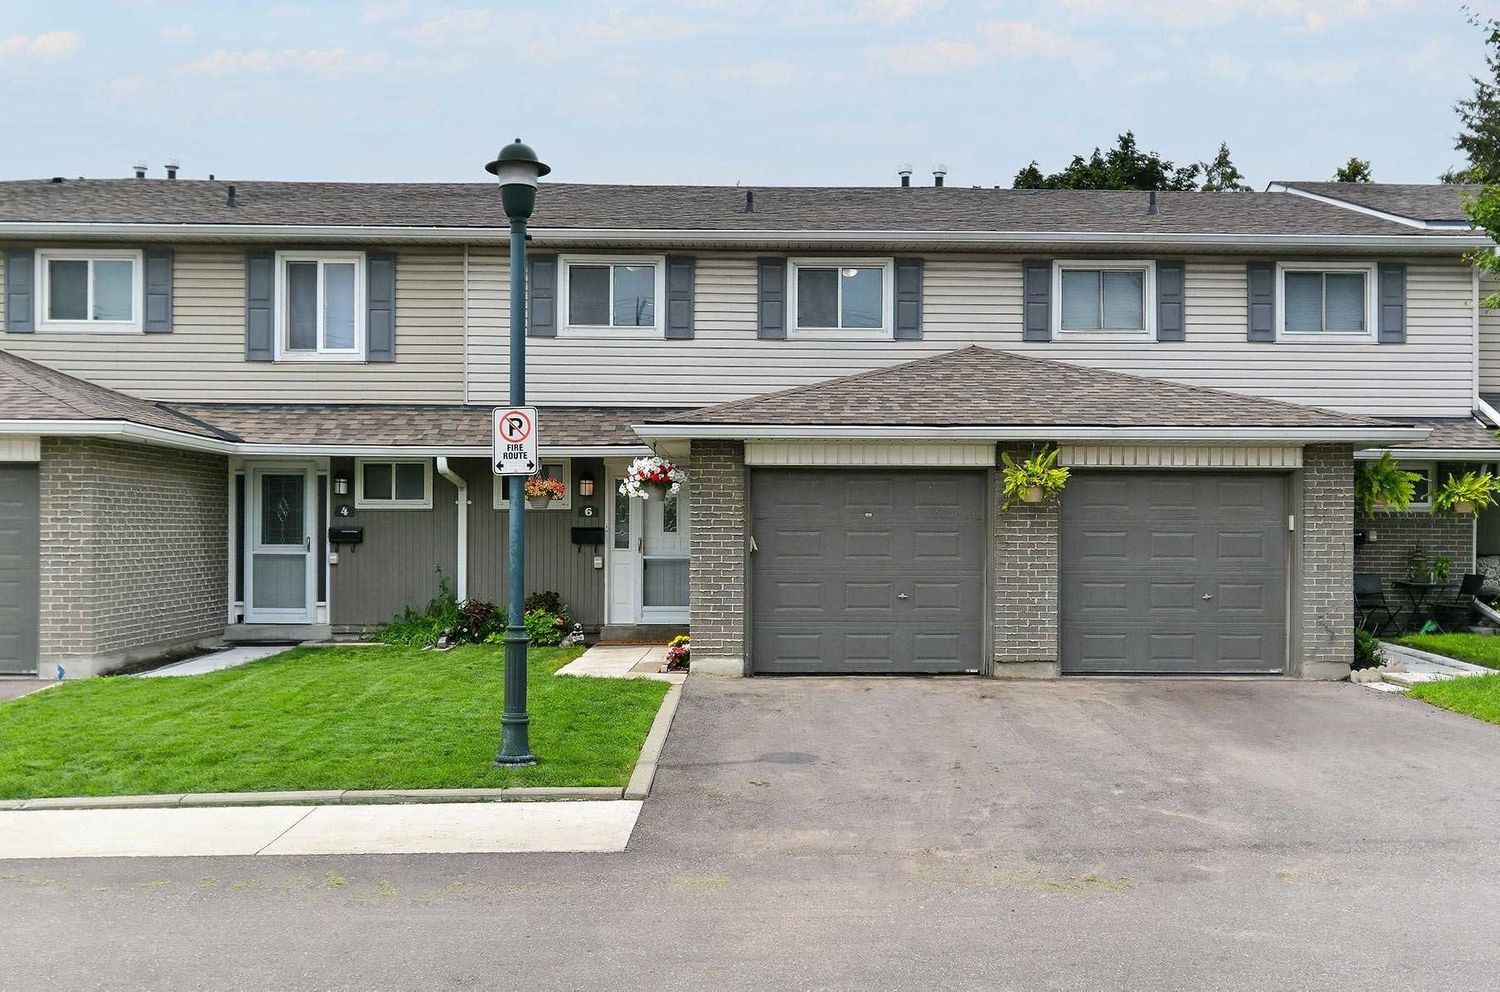 2-66 Village Court. 22 Village Court Townhouses is located in  Brampton, Toronto - image #2 of 2